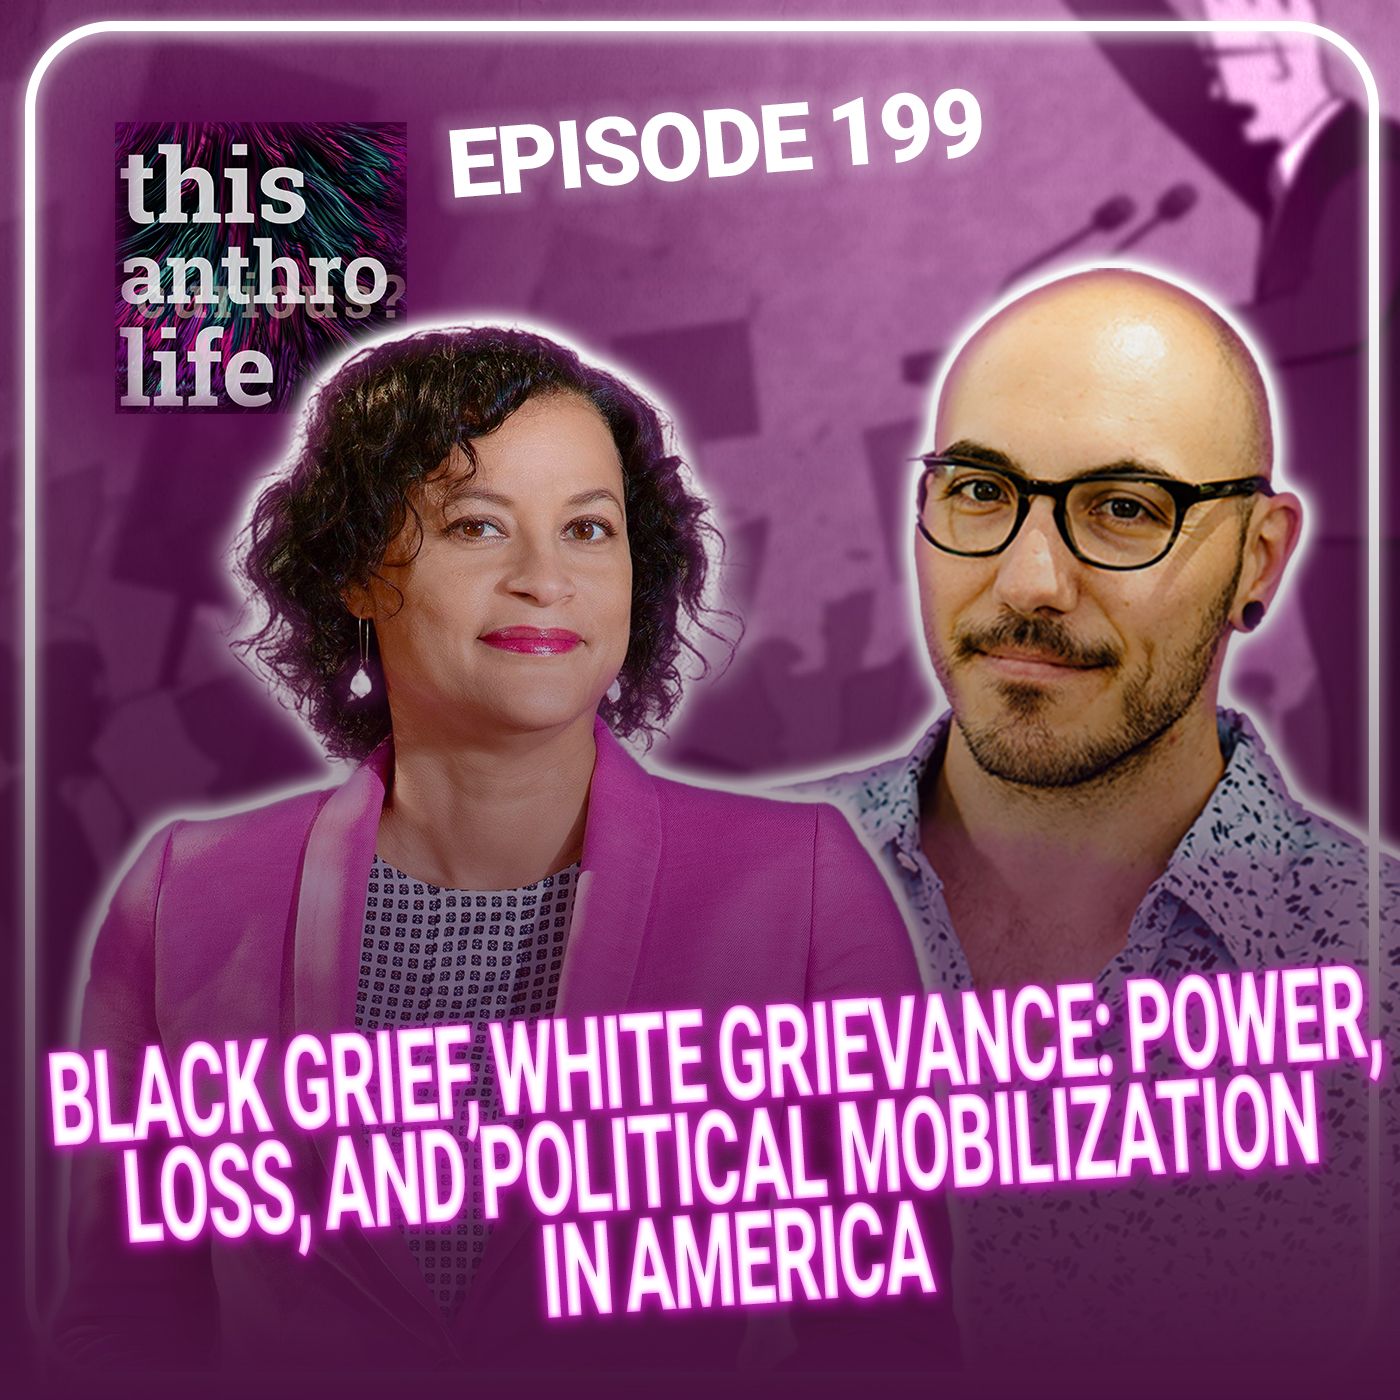 Black Grief, White Grievance: Power, Loss, and Political Mobilization in America